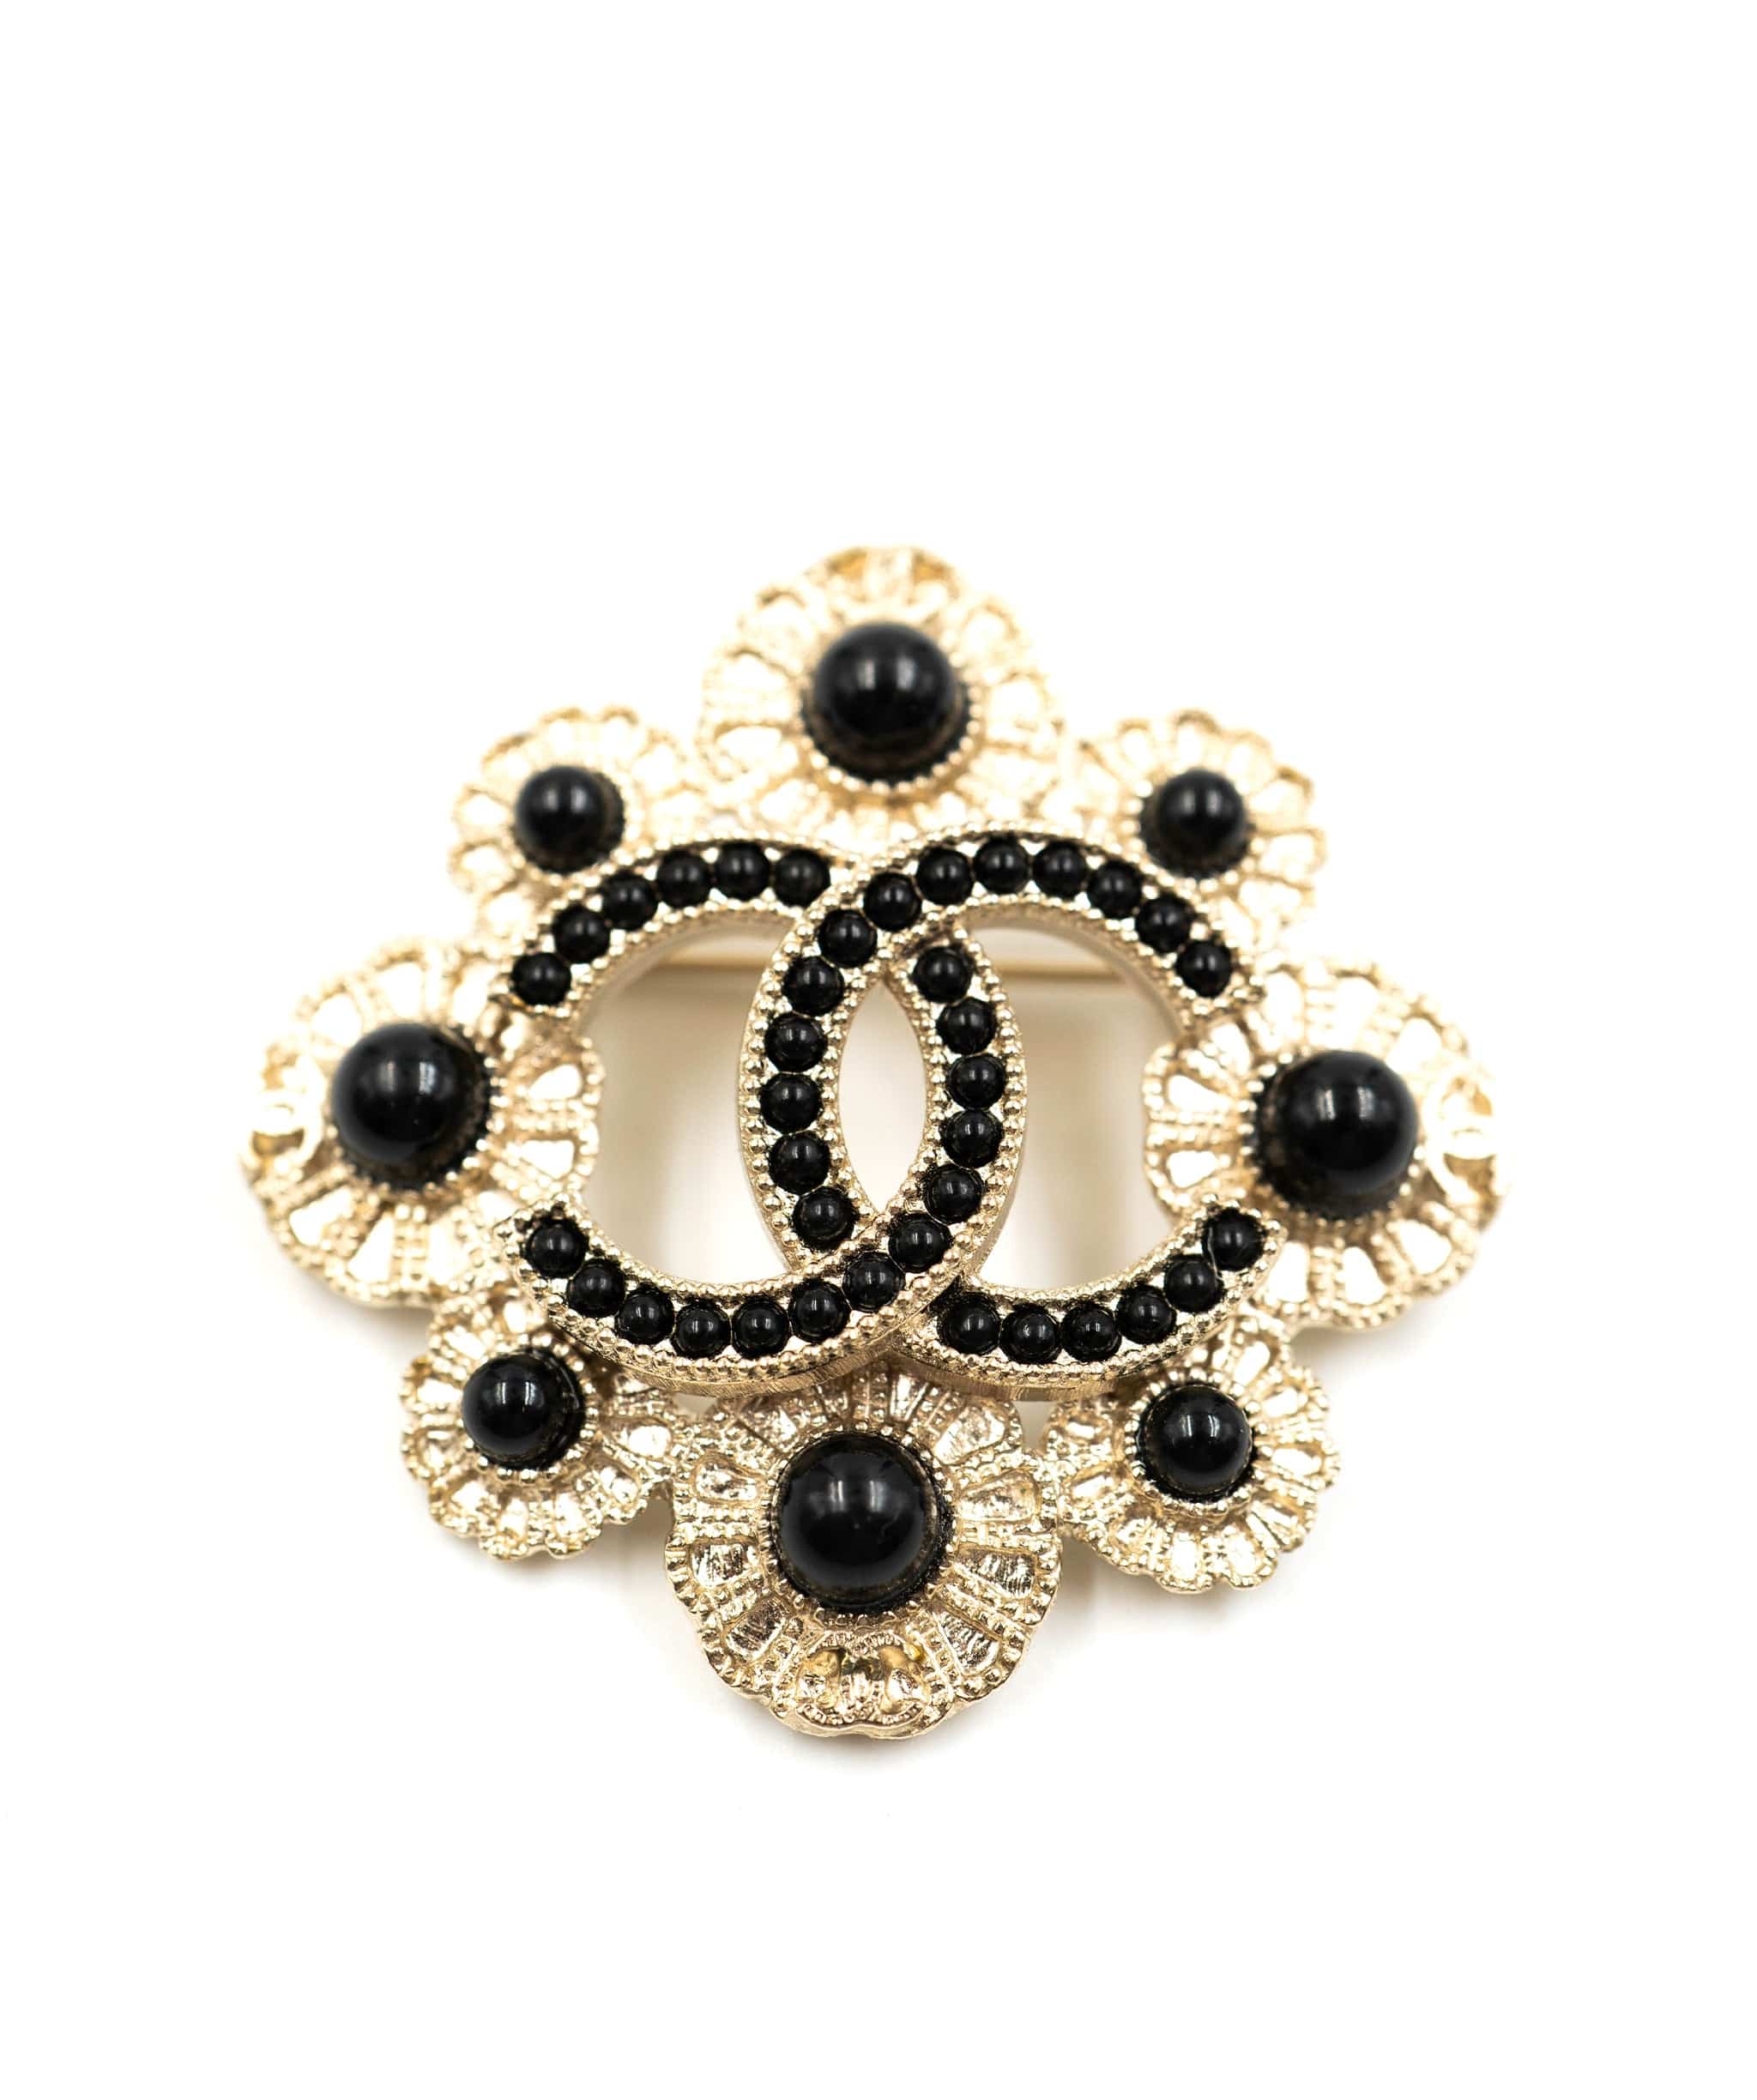 Chanel Chanel CC brooch with black stones - AWL3814